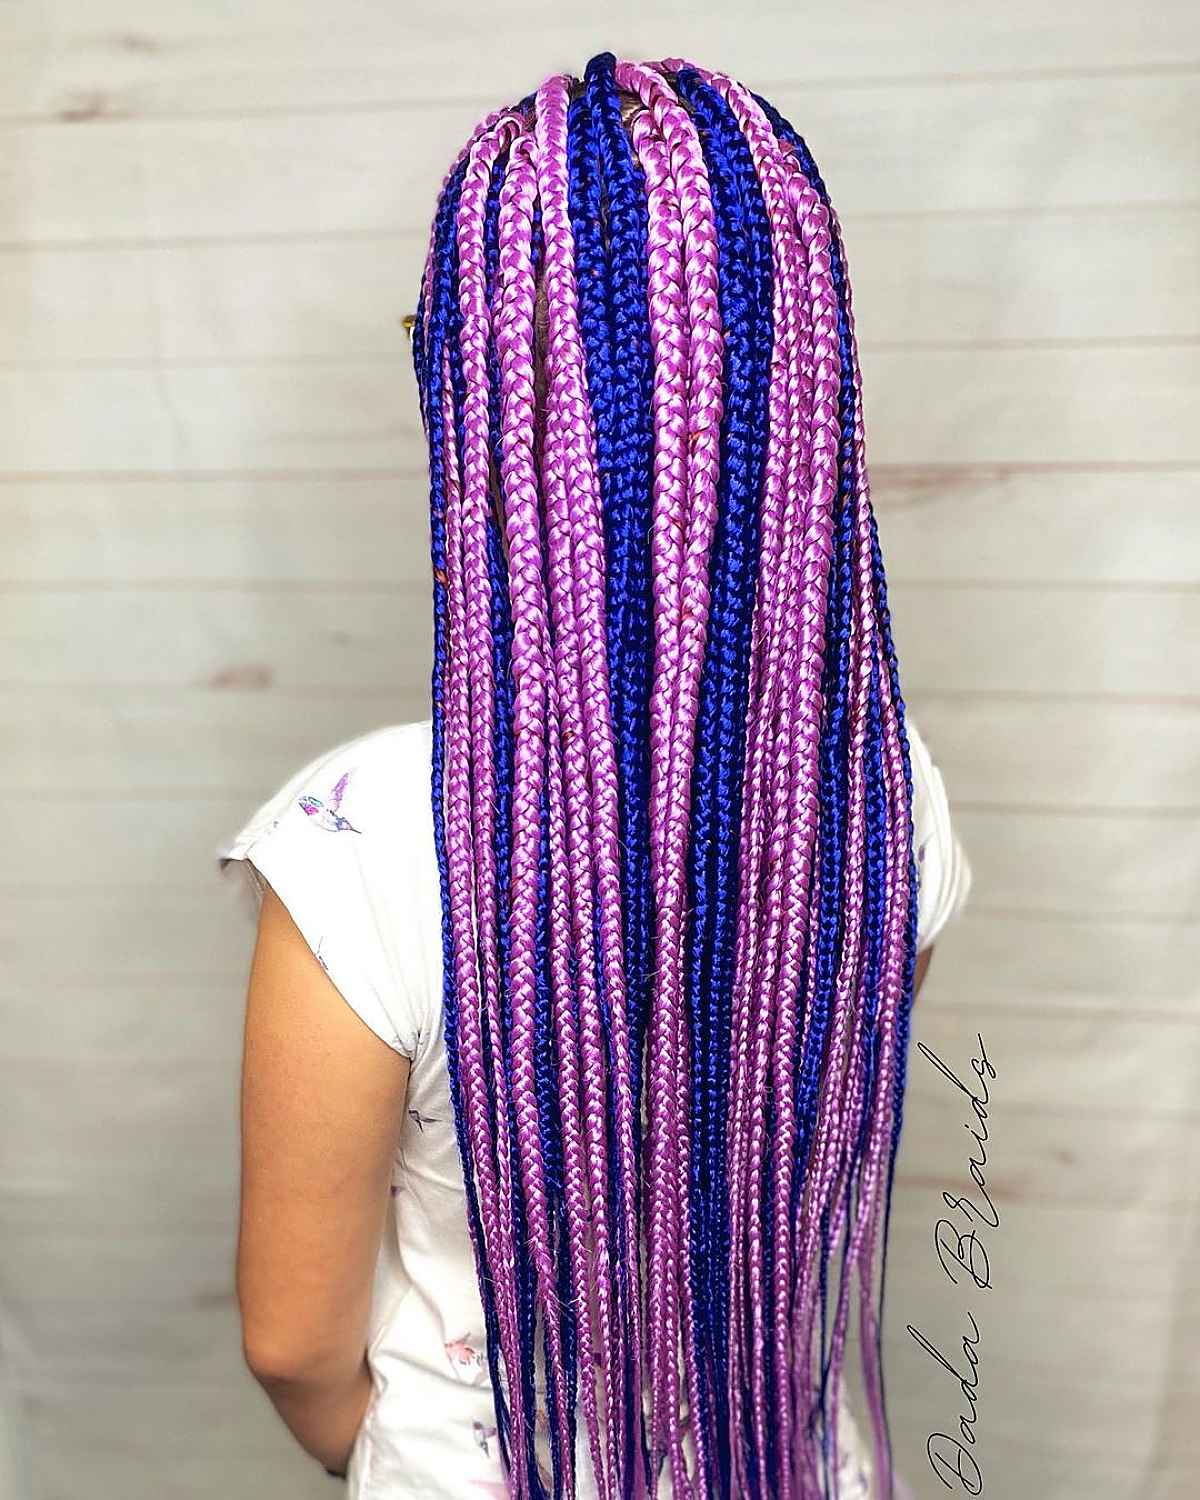 Long box braids with blue and pink hues